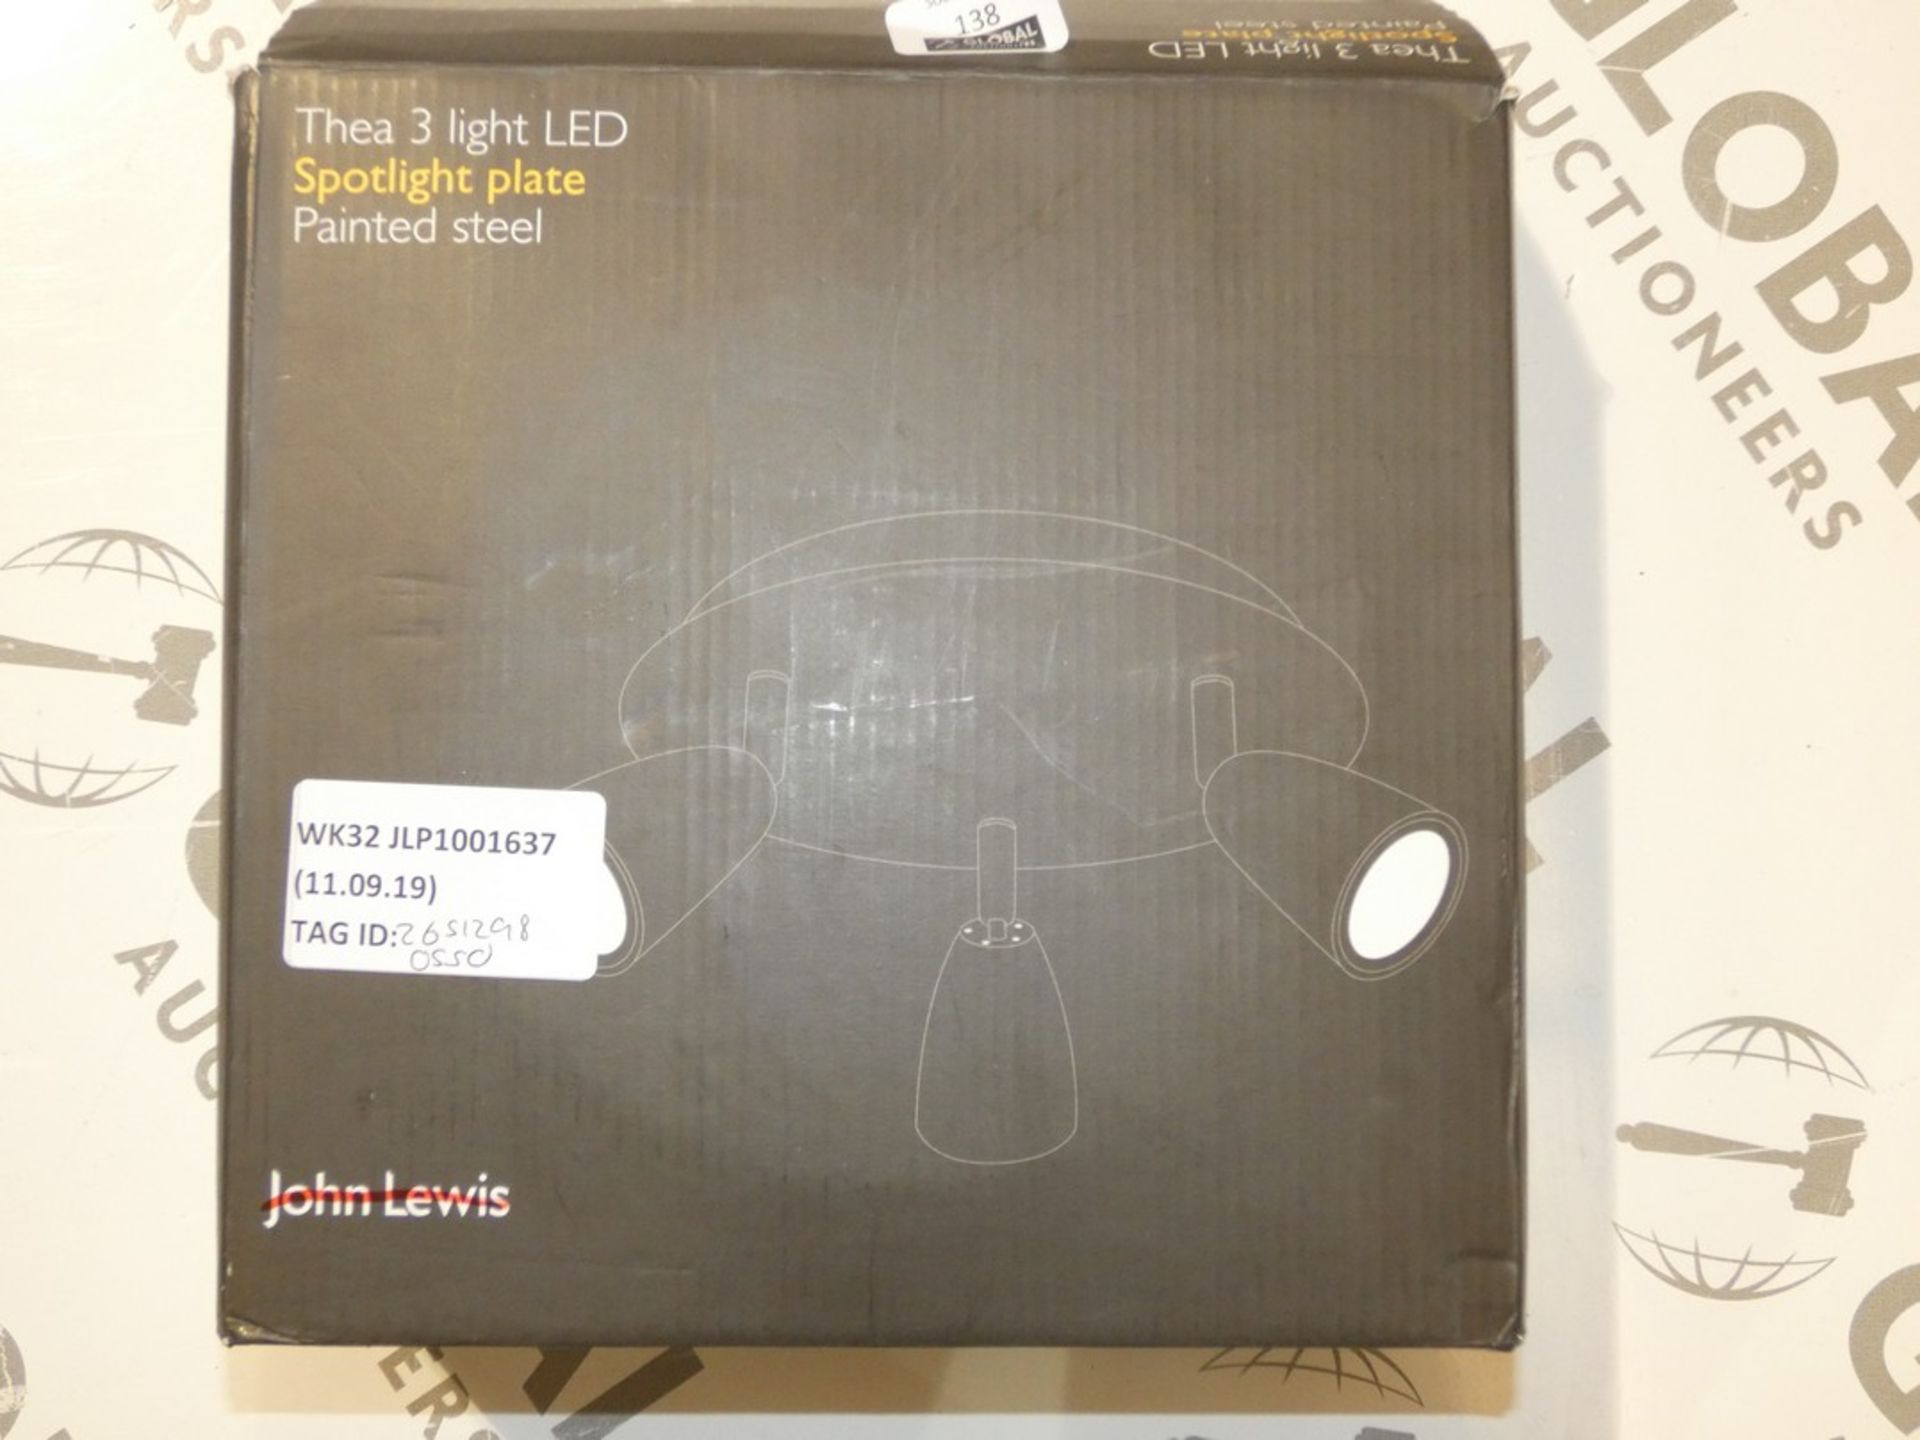 Boxed John Lewis And Partners Thea 3 Light LED Spotlight Fitting RRP £55 (2651298) (Public Viewing